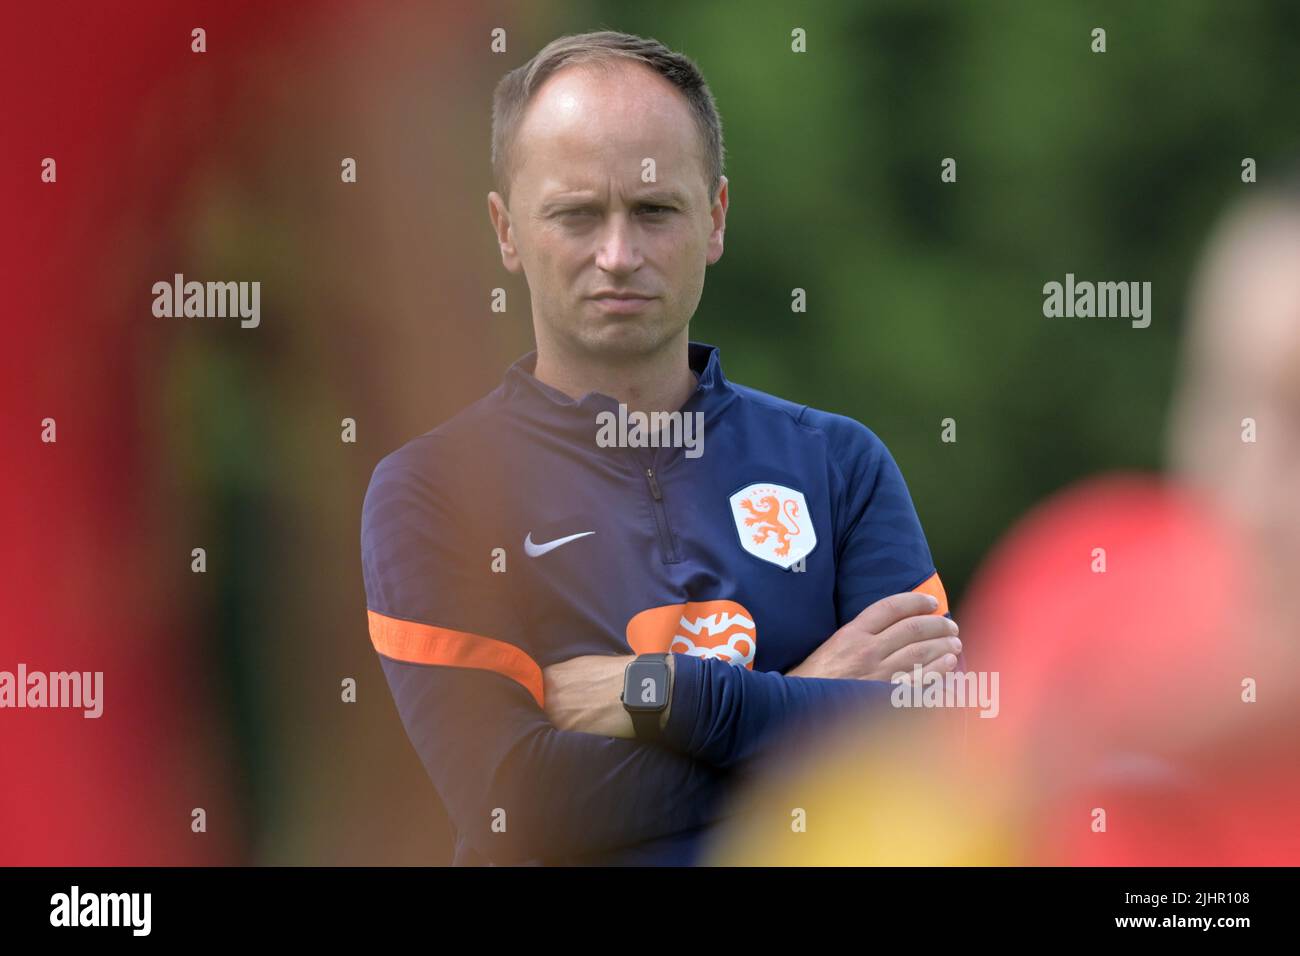 STOCKPORT - UK, 20/07/2022, Holland women's trainer coach Mark Parsons during a training session for the Dutch women's national team on July 20, 2022 at Stockport County FC in Stockport prior to the UEFA Women's EURO England 2022 game against France. ANP GERRIT VAN COLOGNE Stock Photo